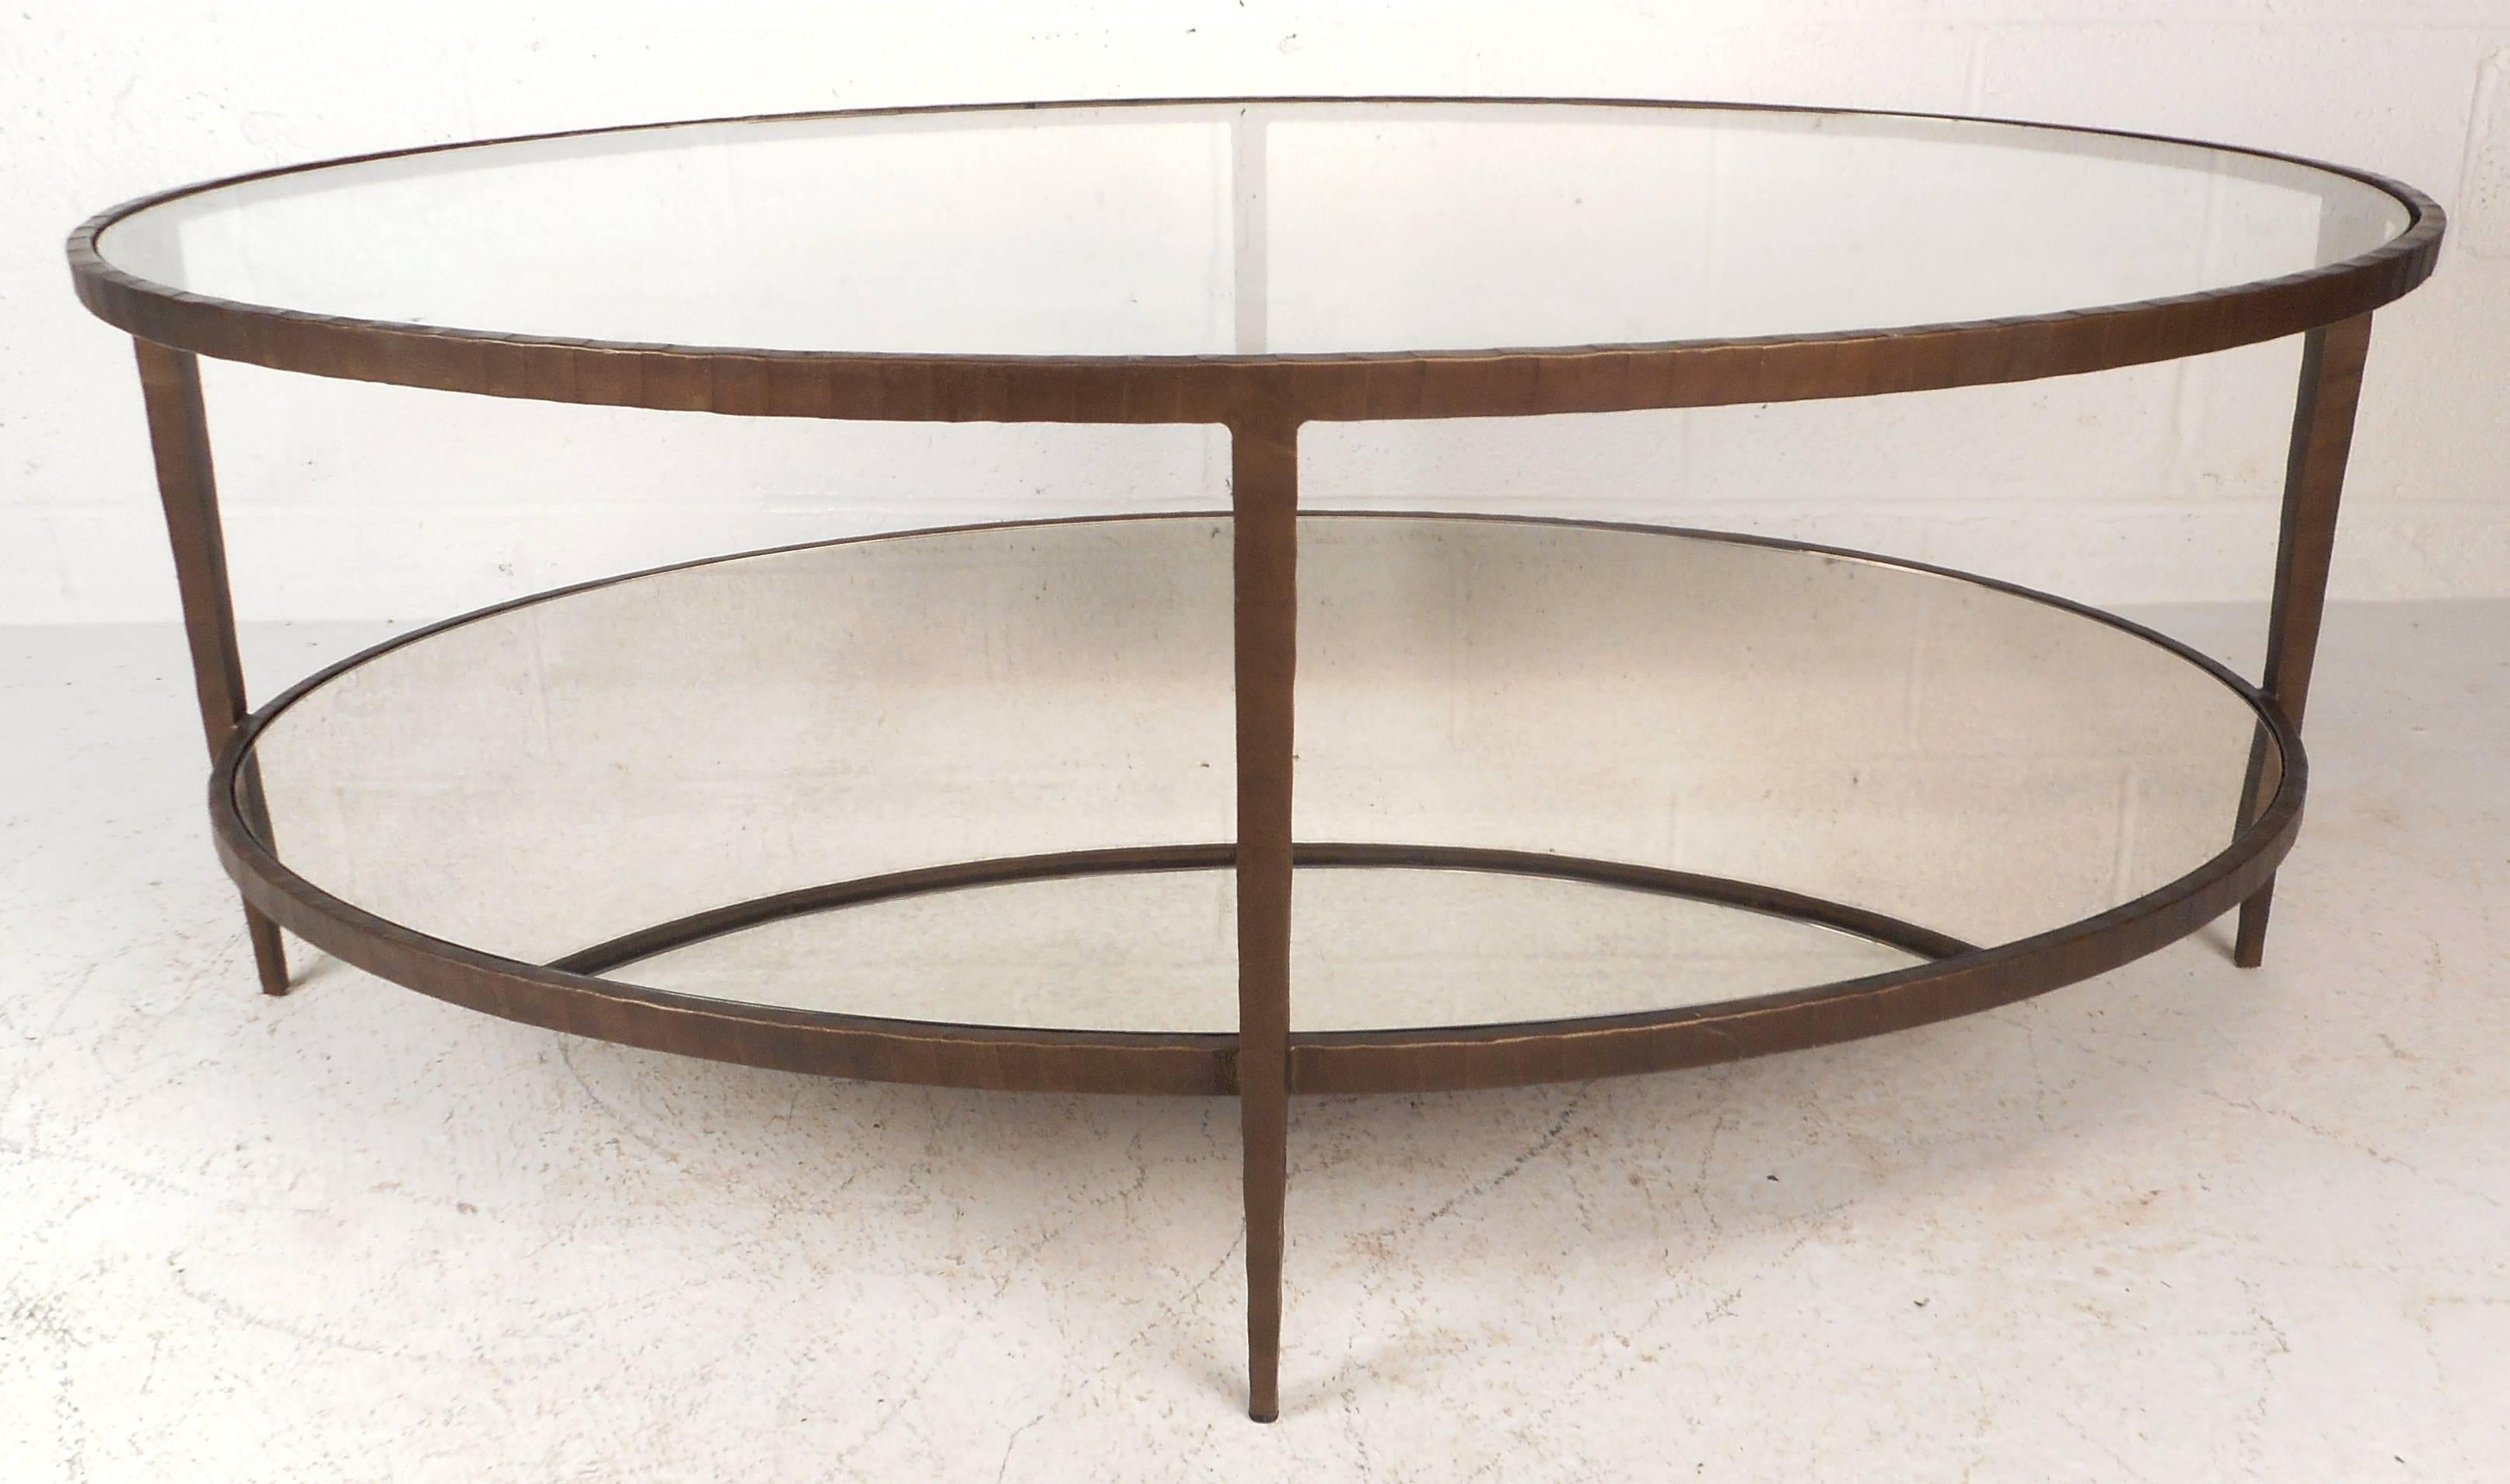 This vintage modern coffee table features a unique textured metal frame, a lower mirrored tier, and a thick glass top. The stylish oval floating tiers are supported by sturdy metal tapered legs. The elegant appearance is sure to compliment any